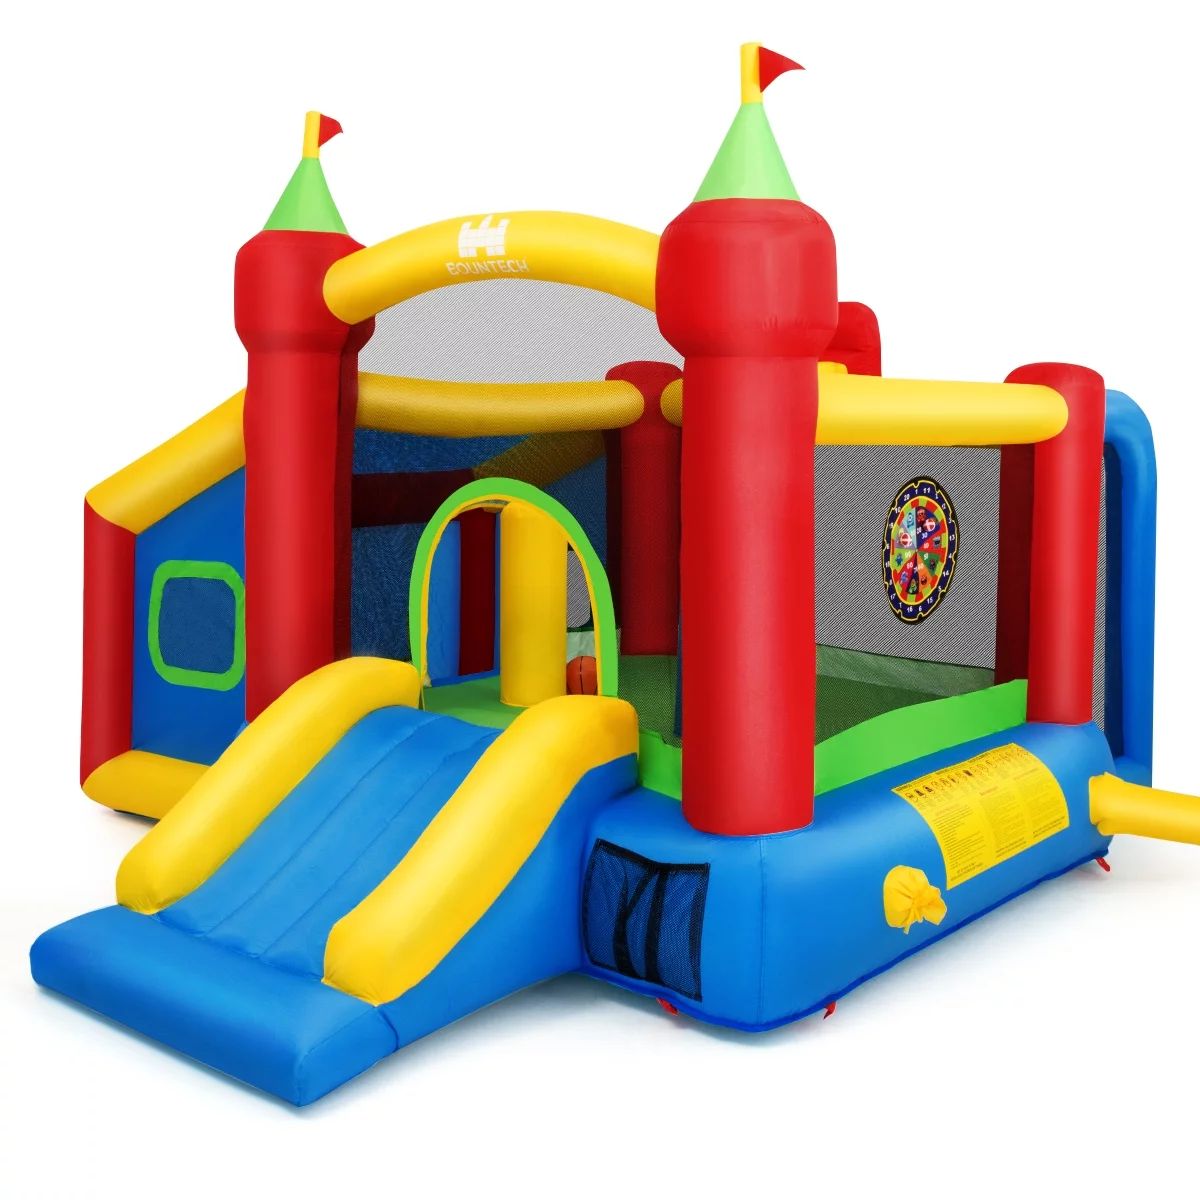 Topbuy Inflatable Castle Bounce House Kids Slide Jumping Playhouse with Ball Pit and Dart Board -... | Walmart (US)